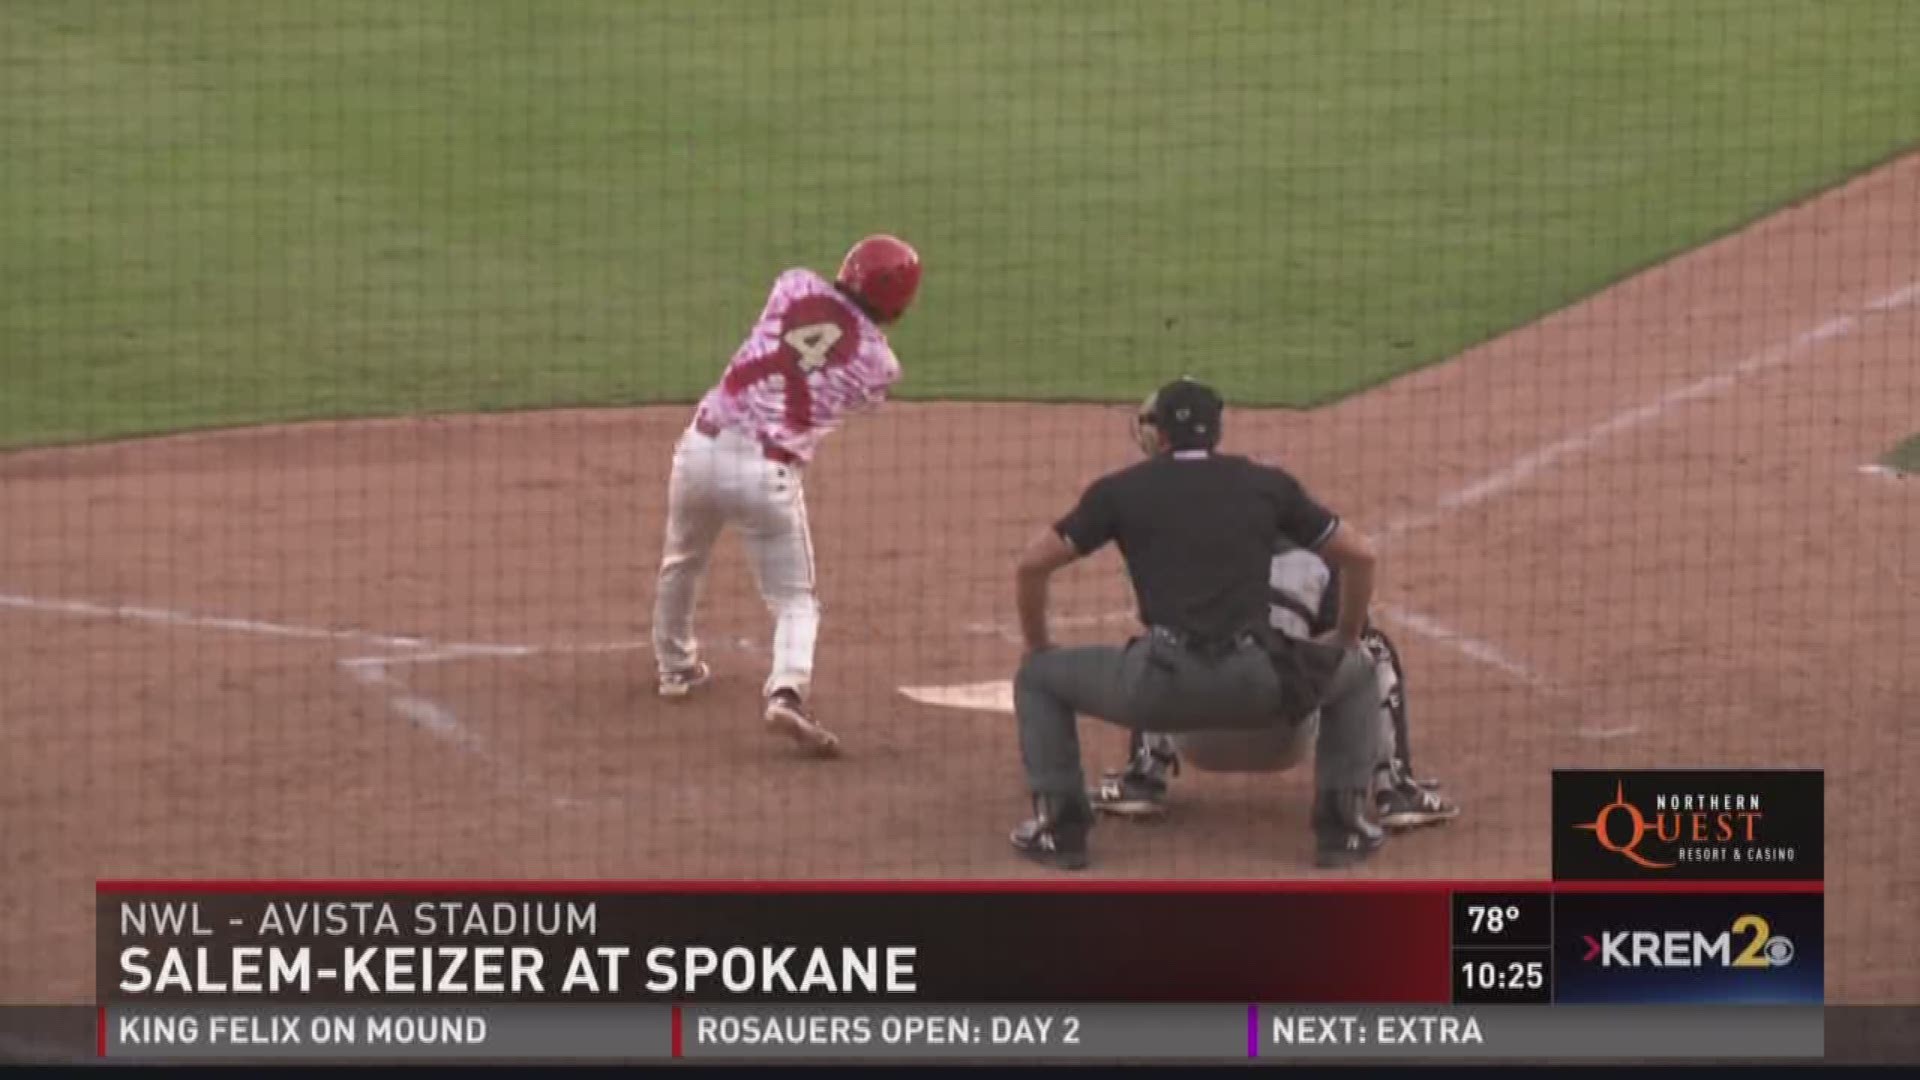 The Spokane Indians exploded for six runs in the 4th inning to beat Salem-Keizer, 8-4, Saturday night.